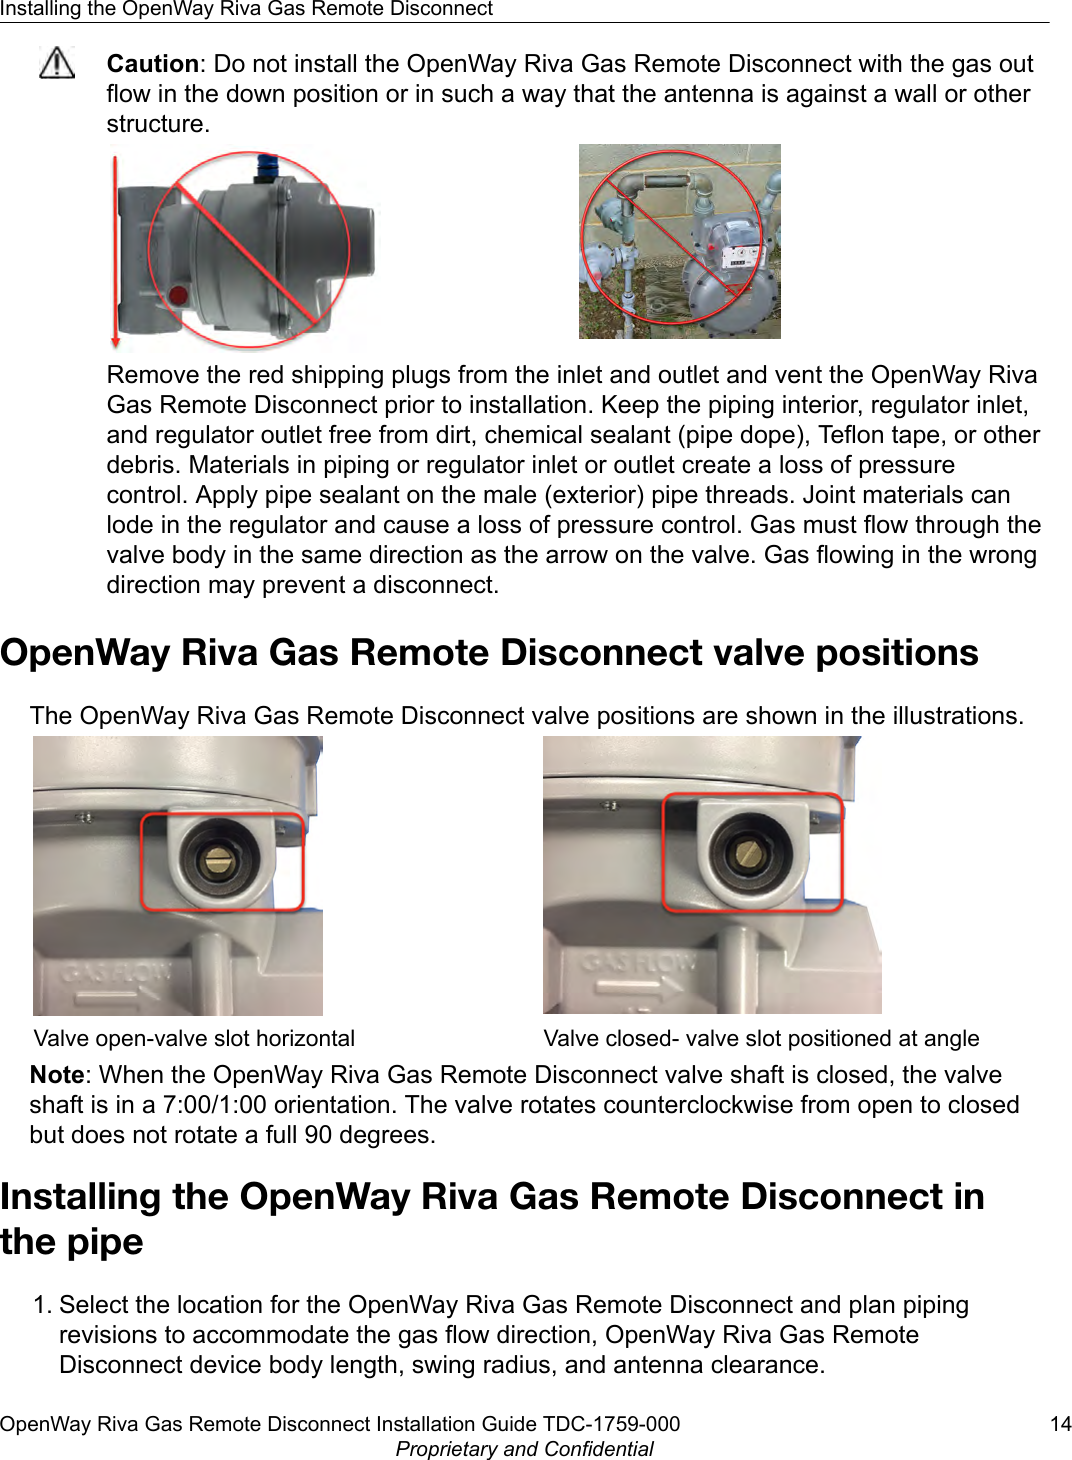 Caution: Do not install the OpenWay Riva Gas Remote Disconnect with the gas outflow in the down position or in such a way that the antenna is against a wall or otherstructure.Remove the red shipping plugs from the inlet and outlet and vent the OpenWay RivaGas Remote Disconnect prior to installation. Keep the piping interior, regulator inlet,and regulator outlet free from dirt, chemical sealant (pipe dope), Teflon tape, or otherdebris. Materials in piping or regulator inlet or outlet create a loss of pressurecontrol. Apply pipe sealant on the male (exterior) pipe threads. Joint materials canlode in the regulator and cause a loss of pressure control. Gas must flow through thevalve body in the same direction as the arrow on the valve. Gas flowing in the wrongdirection may prevent a disconnect.OpenWay Riva Gas Remote Disconnect valve positionsThe OpenWay Riva Gas Remote Disconnect valve positions are shown in the illustrations.Valve open-valve slot horizontal Valve closed- valve slot positioned at angleNote: When the OpenWay Riva Gas Remote Disconnect valve shaft is closed, the valveshaft is in a 7:00/1:00 orientation. The valve rotates counterclockwise from open to closedbut does not rotate a full 90 degrees.Installing the OpenWay Riva Gas Remote Disconnect inthe pipe1. Select the location for the OpenWay Riva Gas Remote Disconnect and plan pipingrevisions to accommodate the gas flow direction, OpenWay Riva Gas RemoteDisconnect device body length, swing radius, and antenna clearance.Installing the OpenWay Riva Gas Remote DisconnectOpenWay Riva Gas Remote Disconnect Installation Guide TDC-1759-000 14Proprietary and Confidential